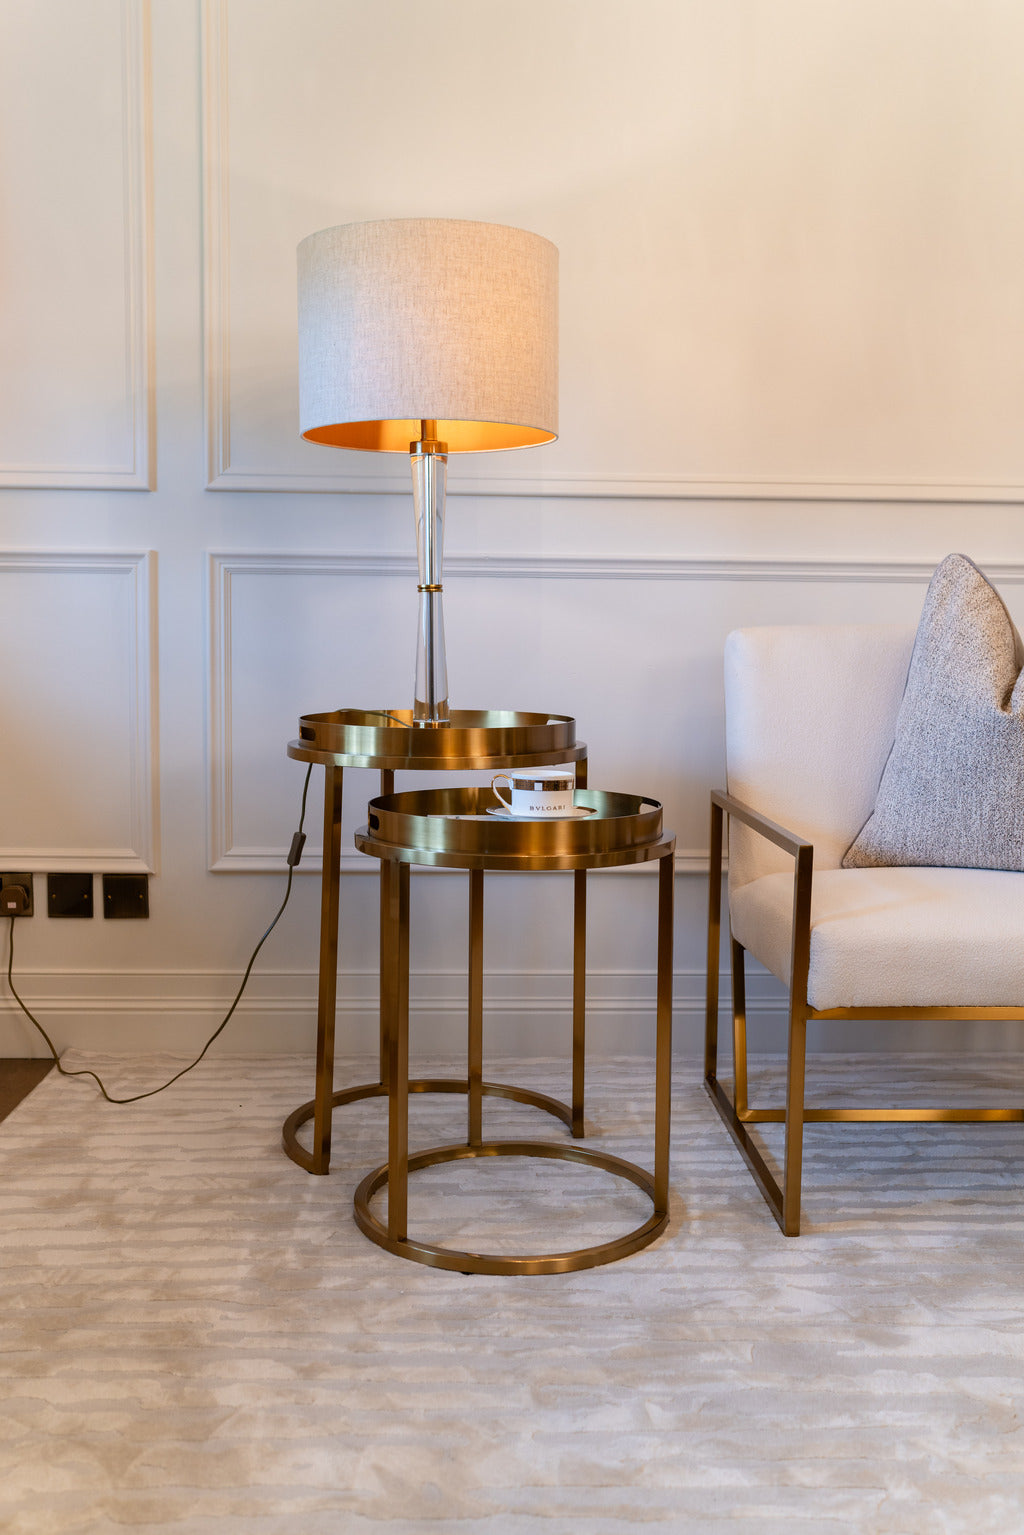 Gold mirrored tale, side tables, blush lampshade